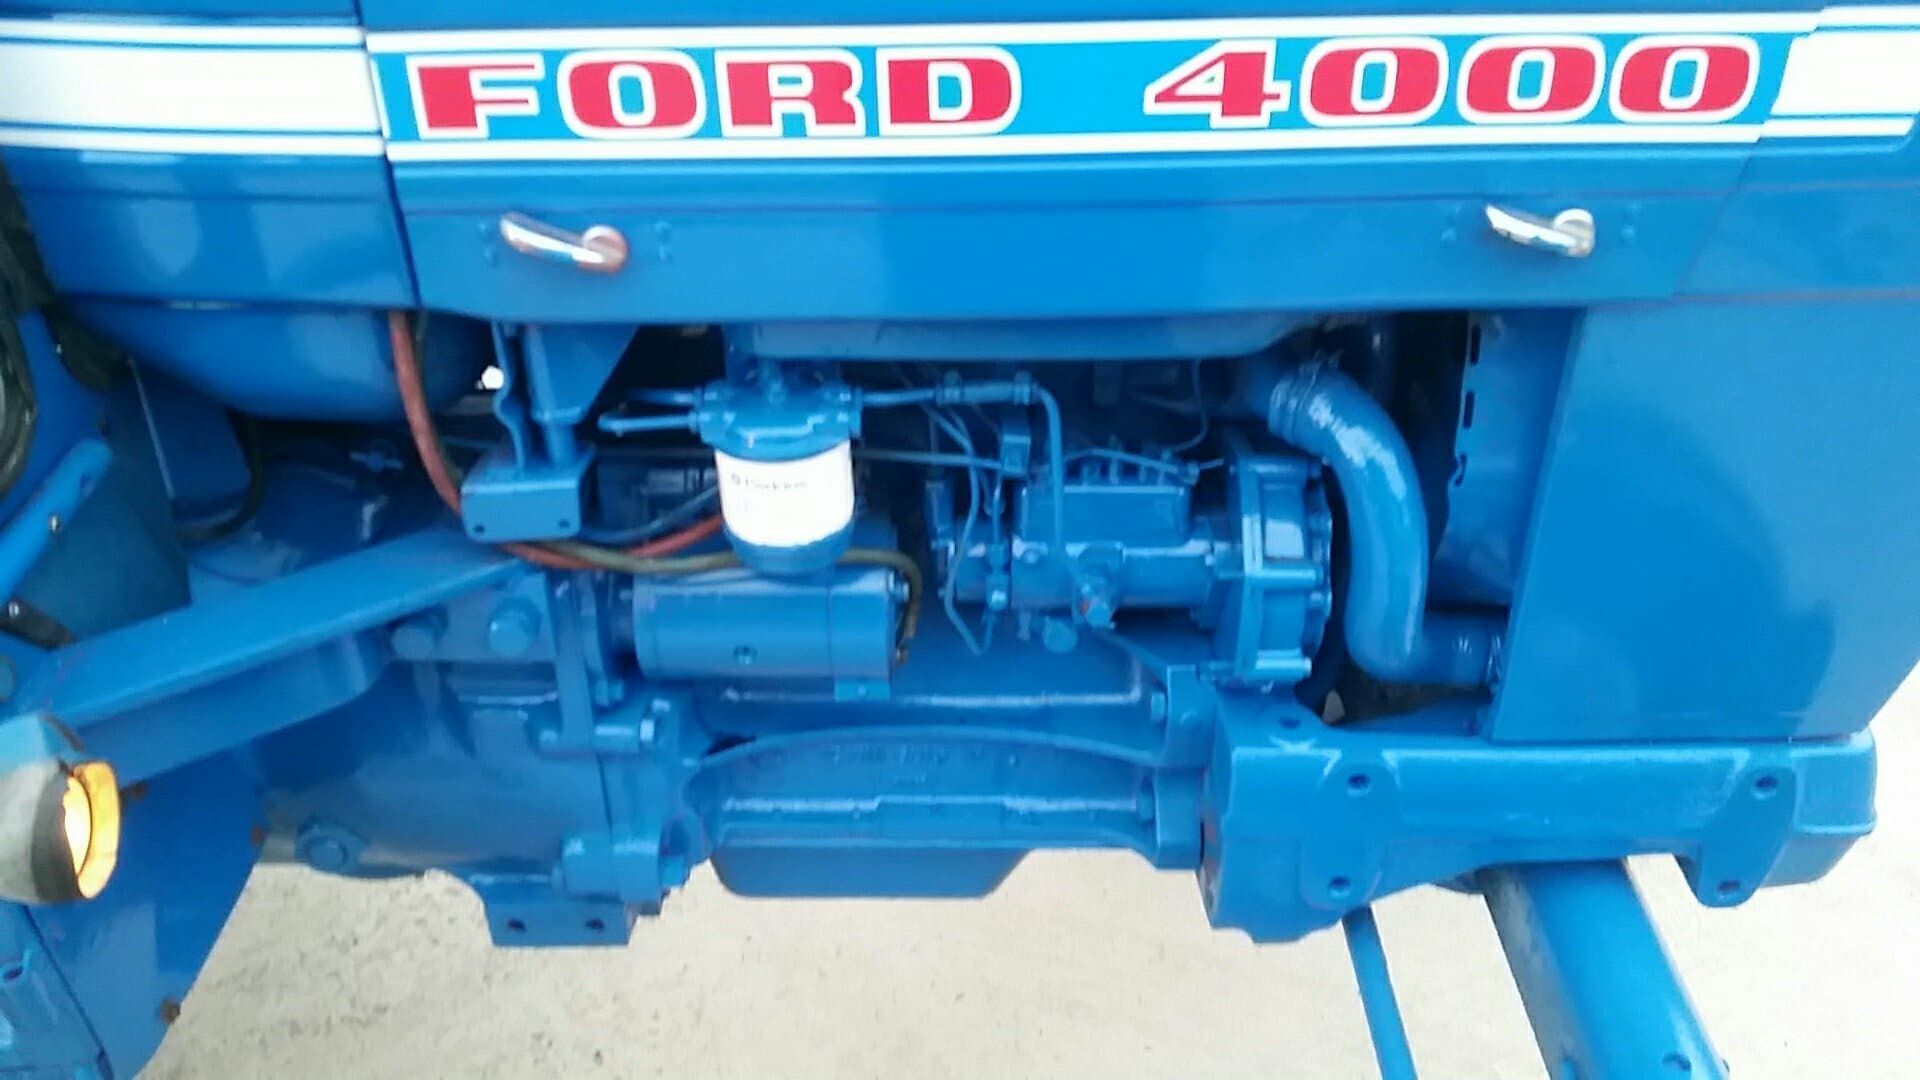 1971 Fully Refurbished Ford 4000 Tractor - Image 6 of 10